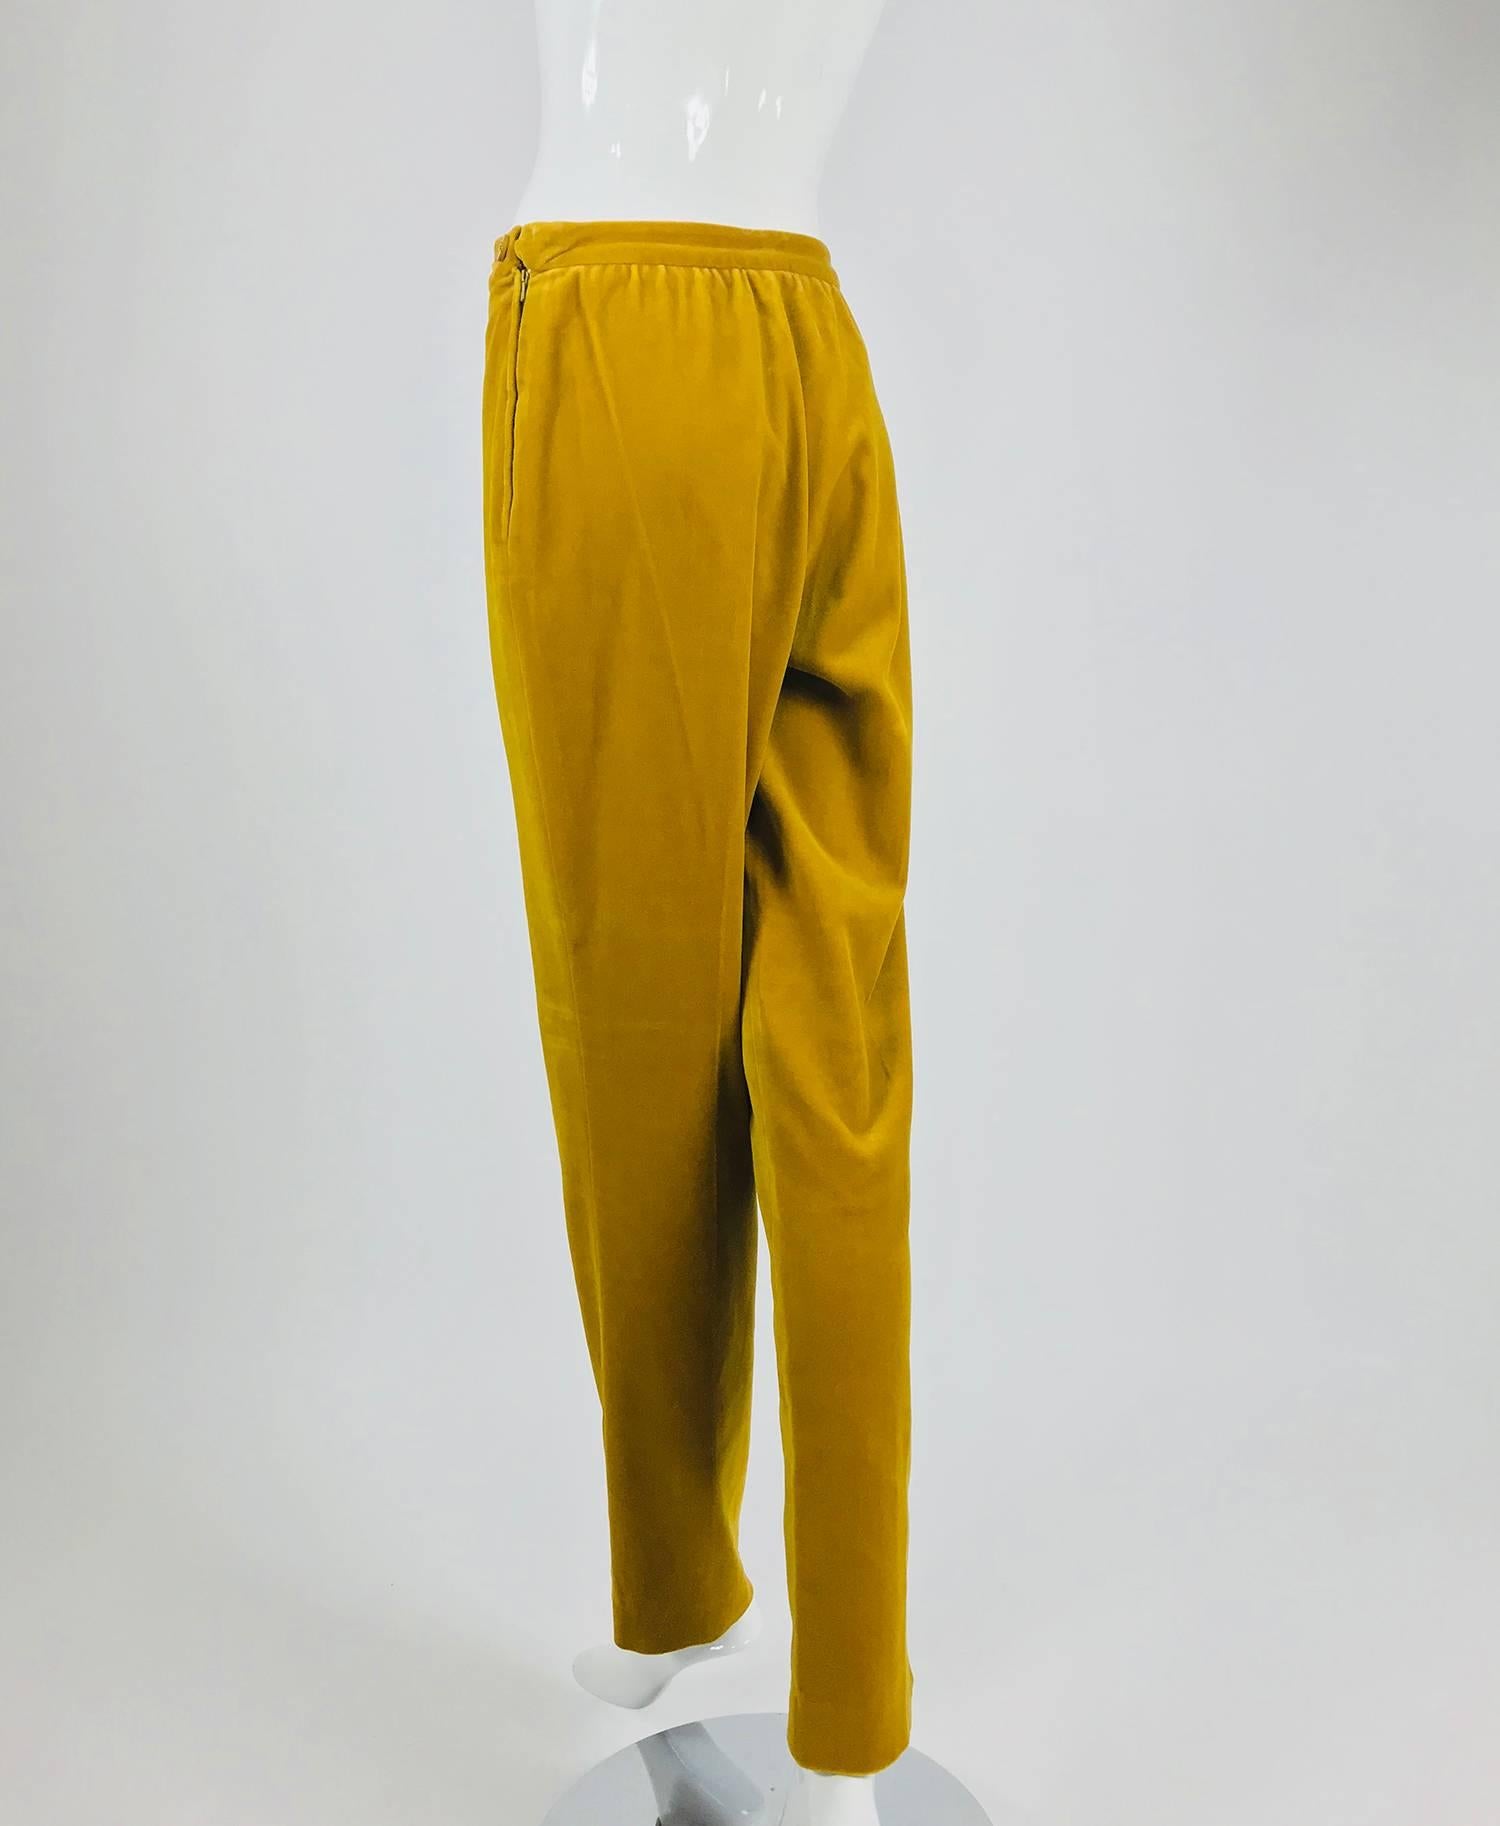 Women's Chanel golden yellow velvet trousers with ankle buttons 1990s